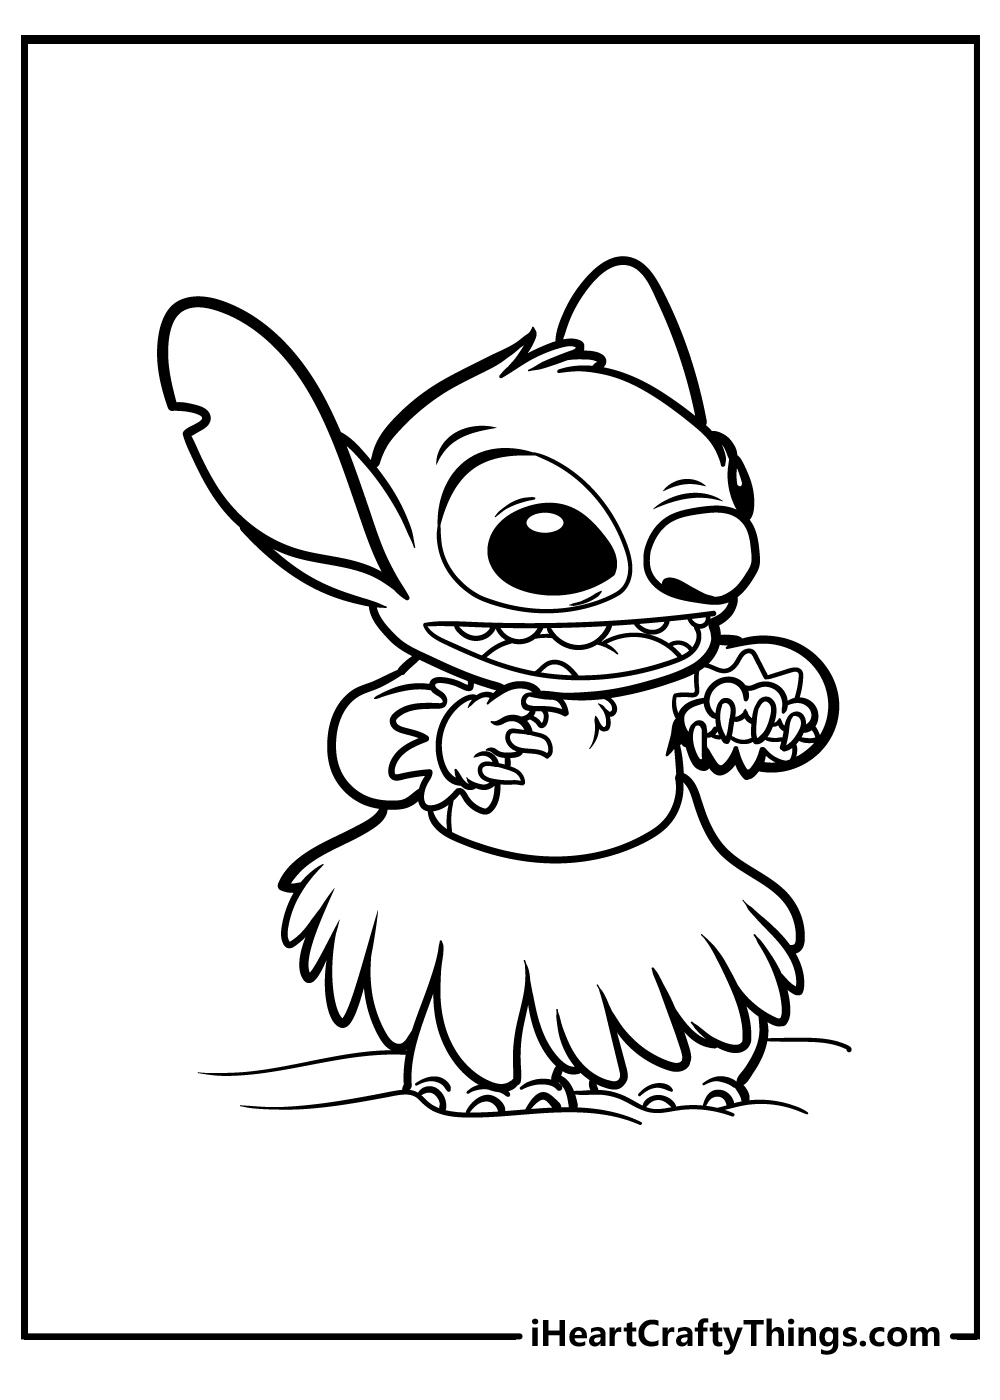 Lilo & Stitch Coloring Pages Updated 20 - Otakugadgets